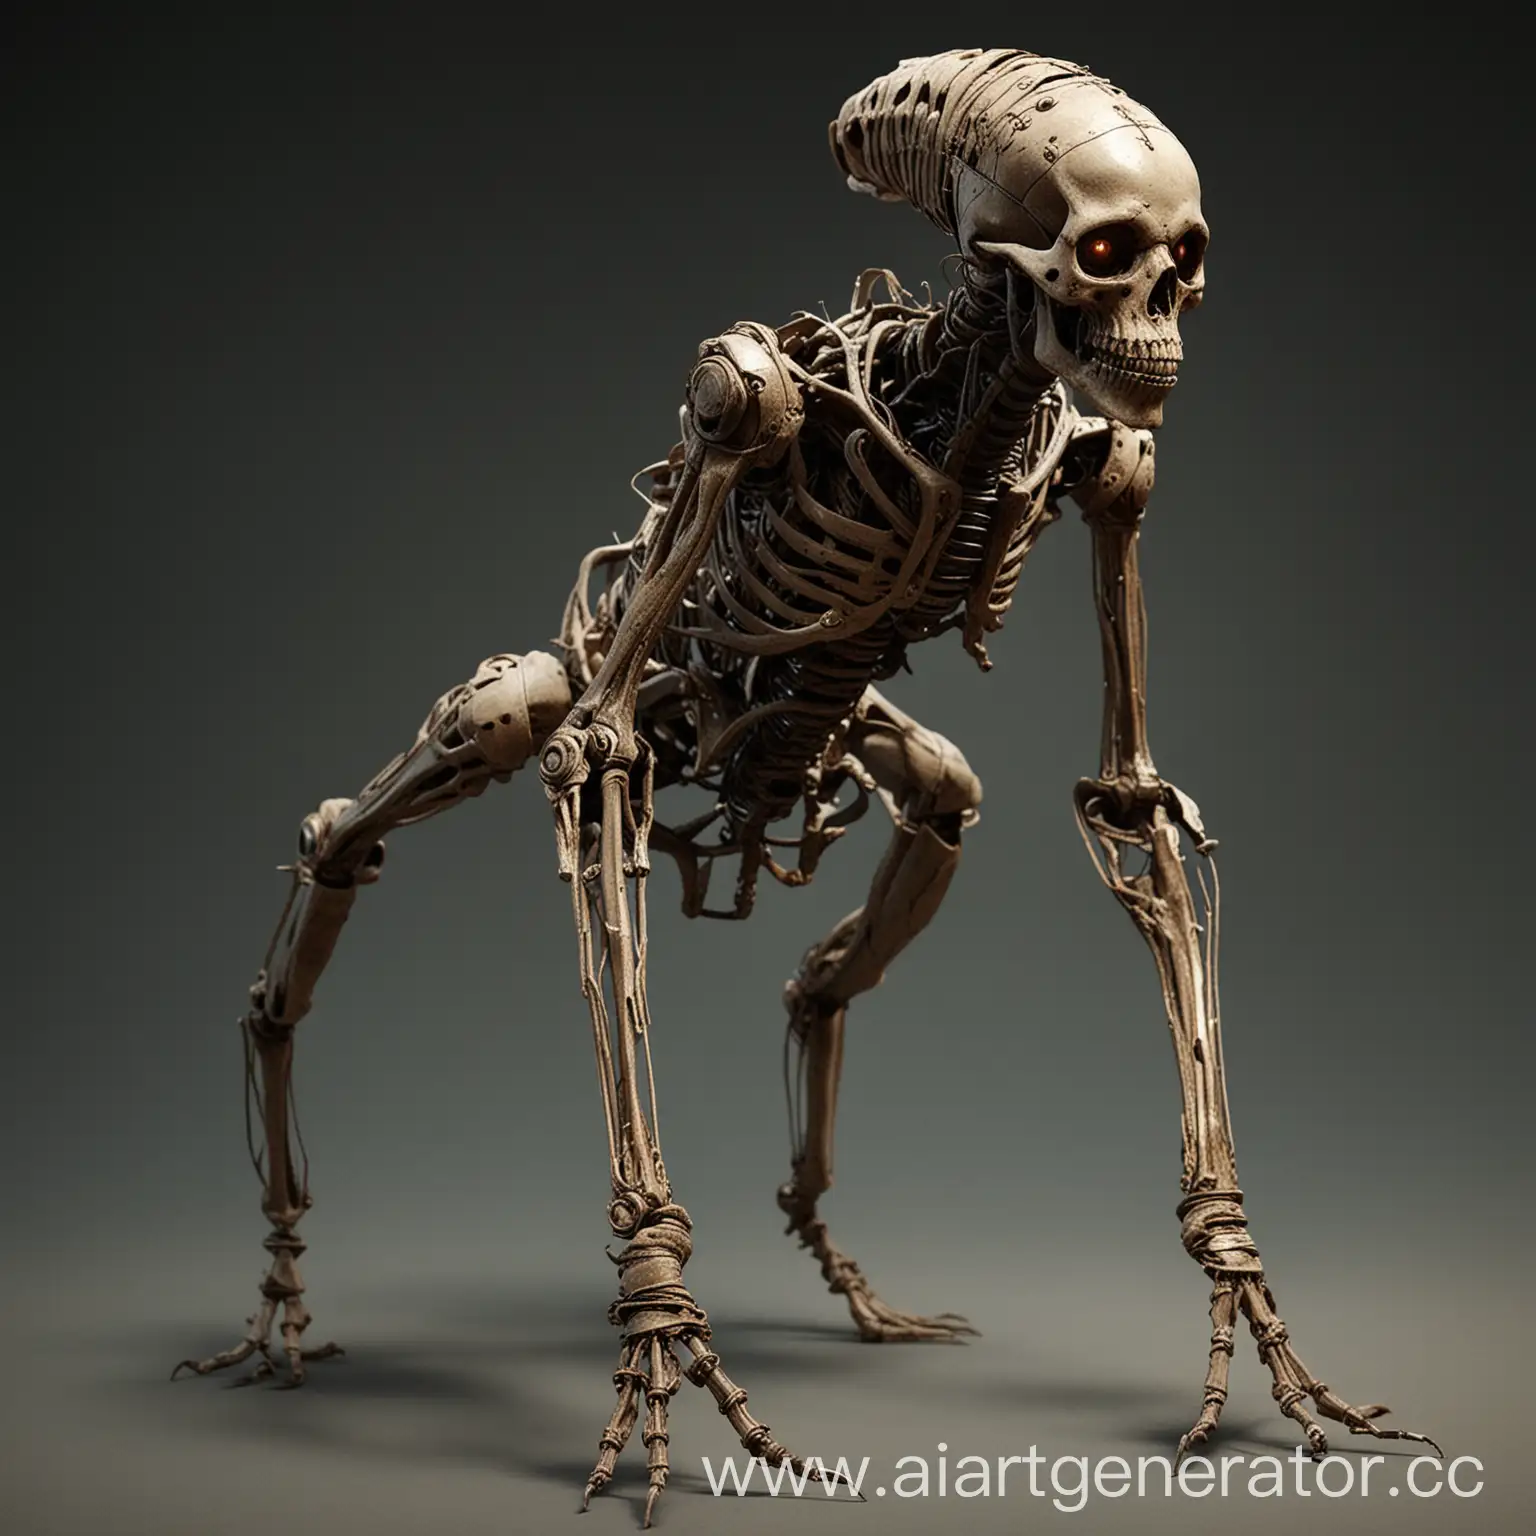 Generate a description for a creature with mechanical elements and a mummified appearance, capable of extending blades from its wrists and moving along the ground in reflections.